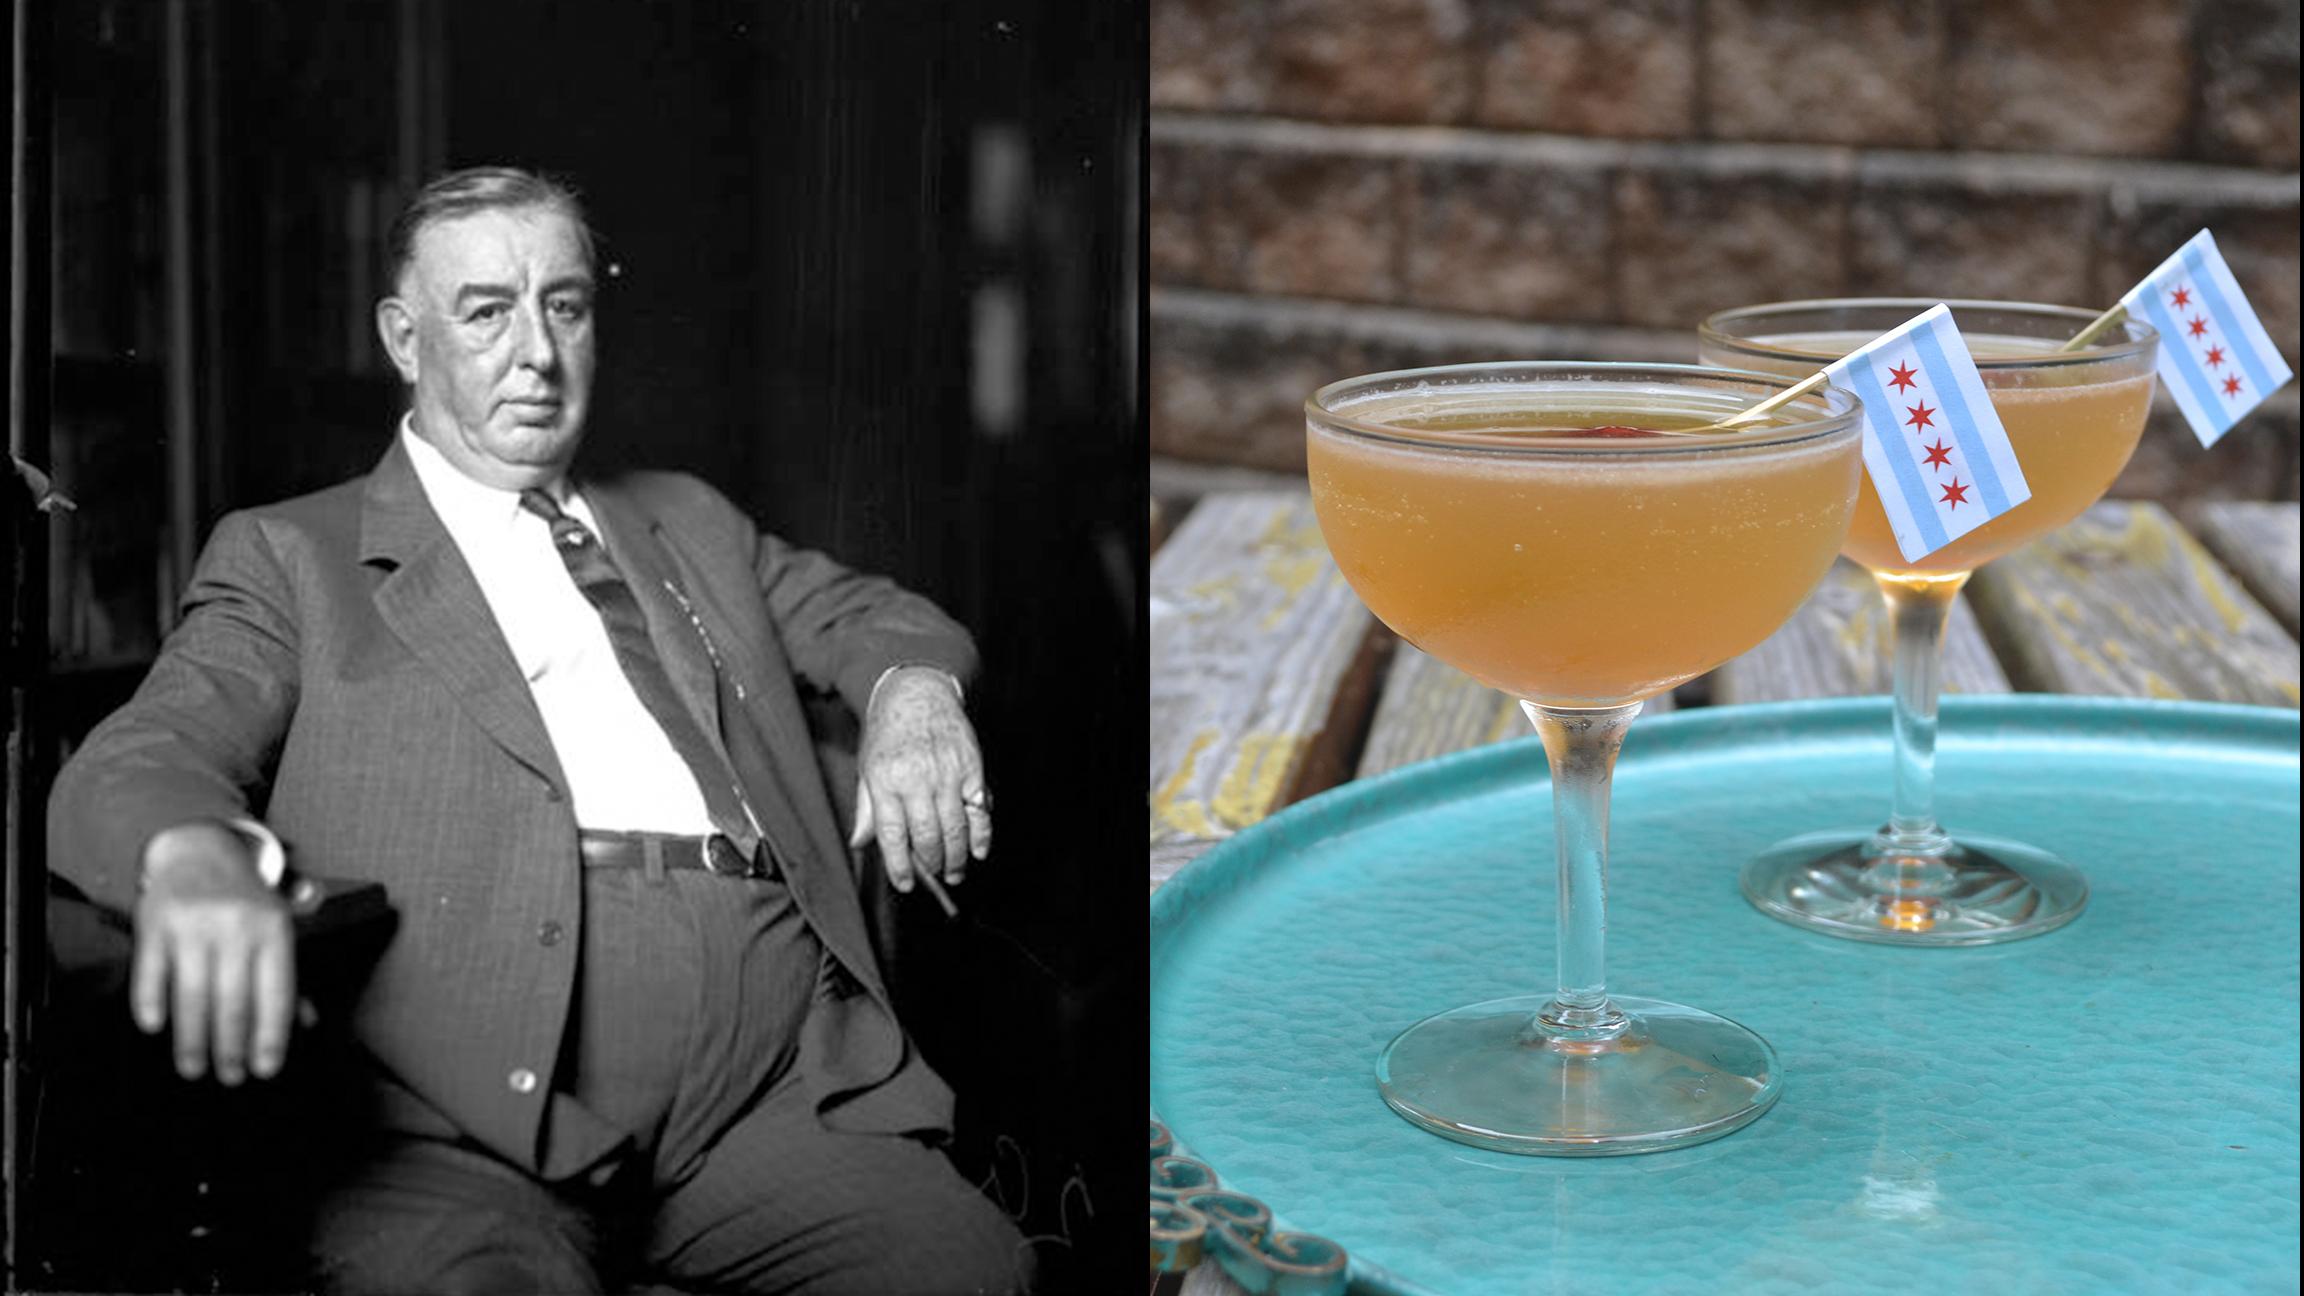 William Hale “Big Bill” Thompson and the cocktail he inspired us to make.